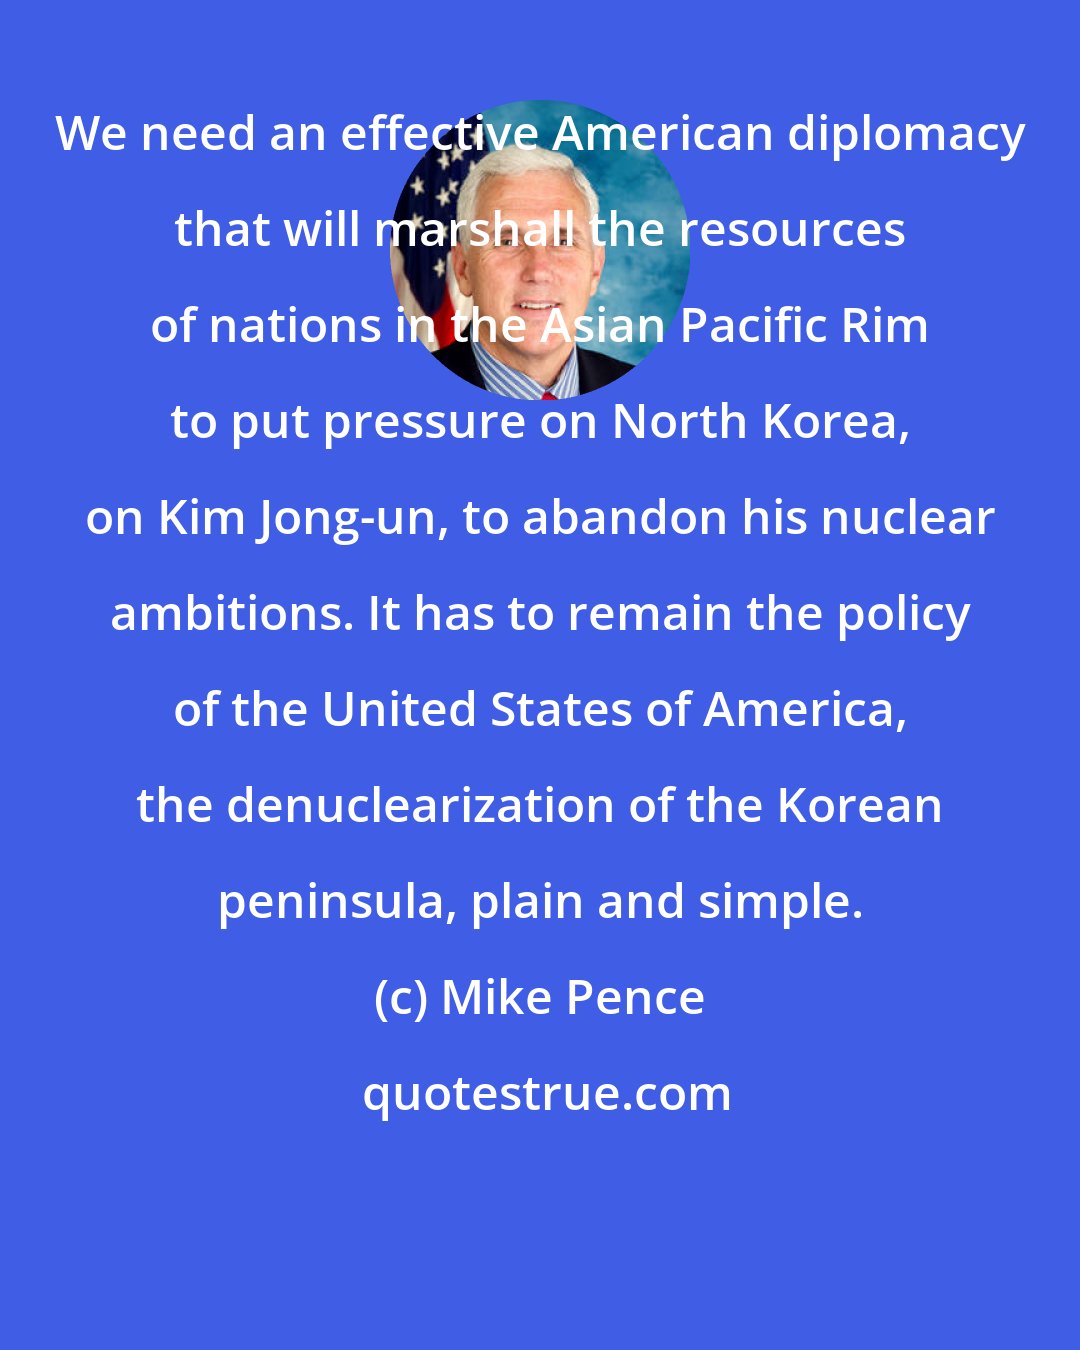 Mike Pence: We need an effective American diplomacy that will marshall the resources of nations in the Asian Pacific Rim to put pressure on North Korea, on Kim Jong-un, to abandon his nuclear ambitions. It has to remain the policy of the United States of America, the denuclearization of the Korean peninsula, plain and simple.